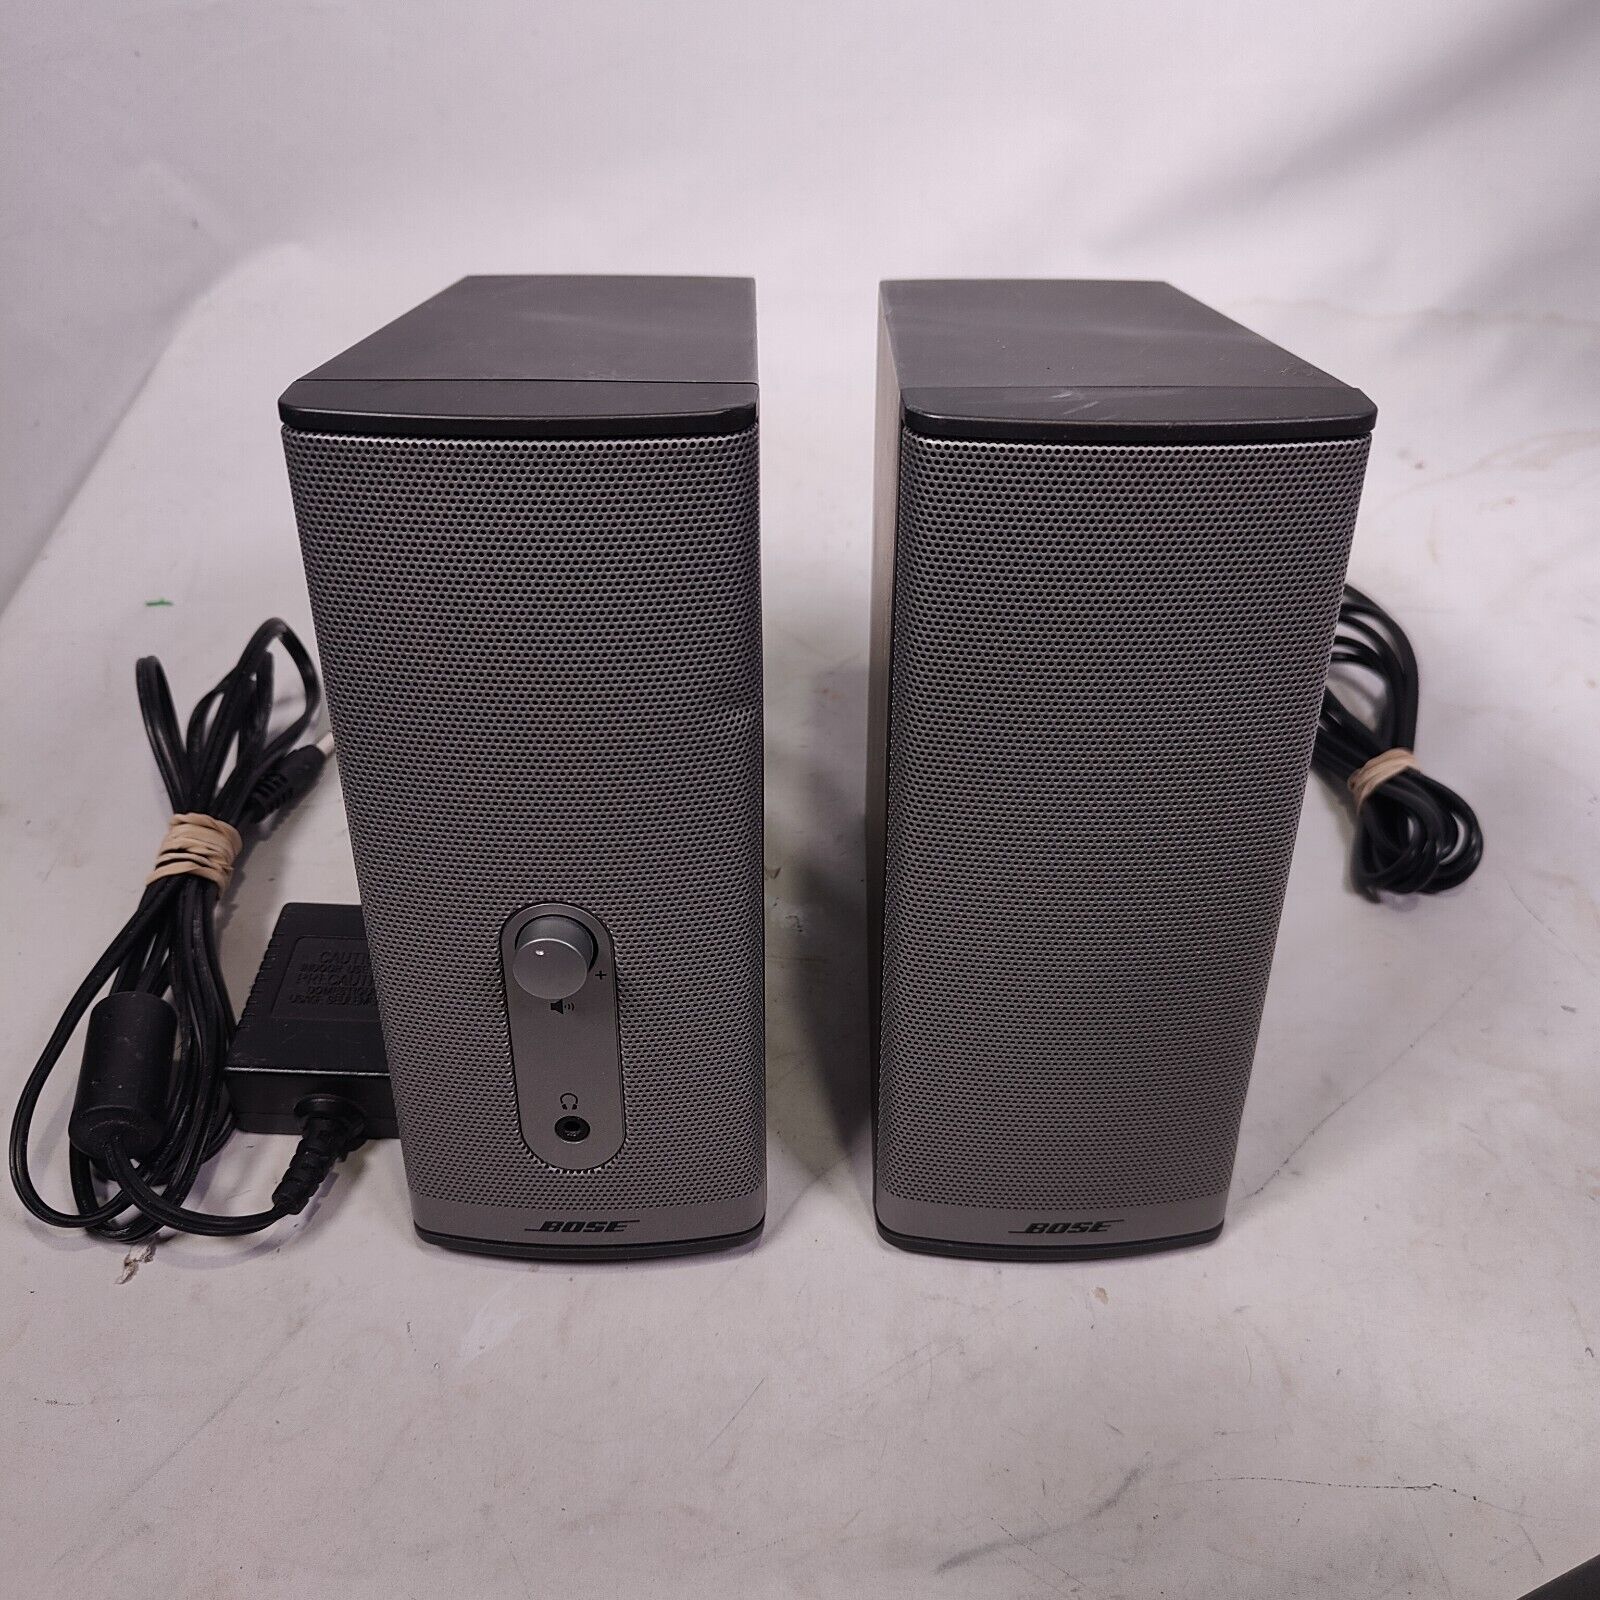 BOSE Companion 2 SERIES II Multimedia Speakers PC Computer W/ Power Cord Tested